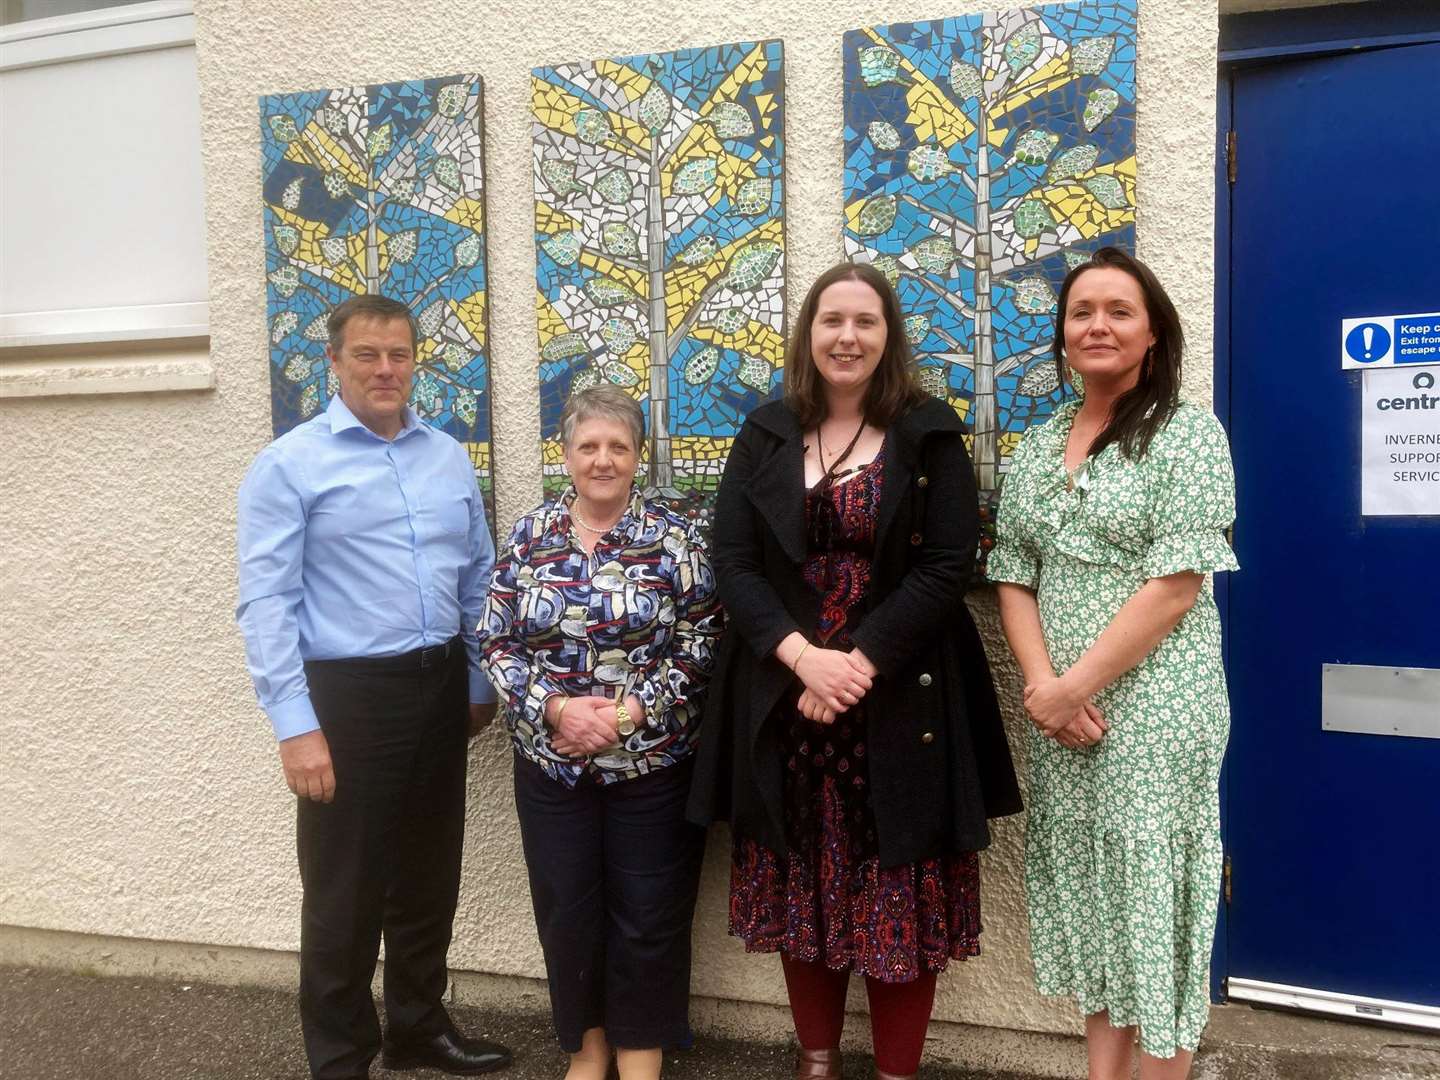 Centred chief executive David Brookfield, deputy chief executive Annabel Mowat (second from left) and the charity's head of communications and research, Dr Clare Daly (right), with Highlands and Islands MSP Emma Roddick.